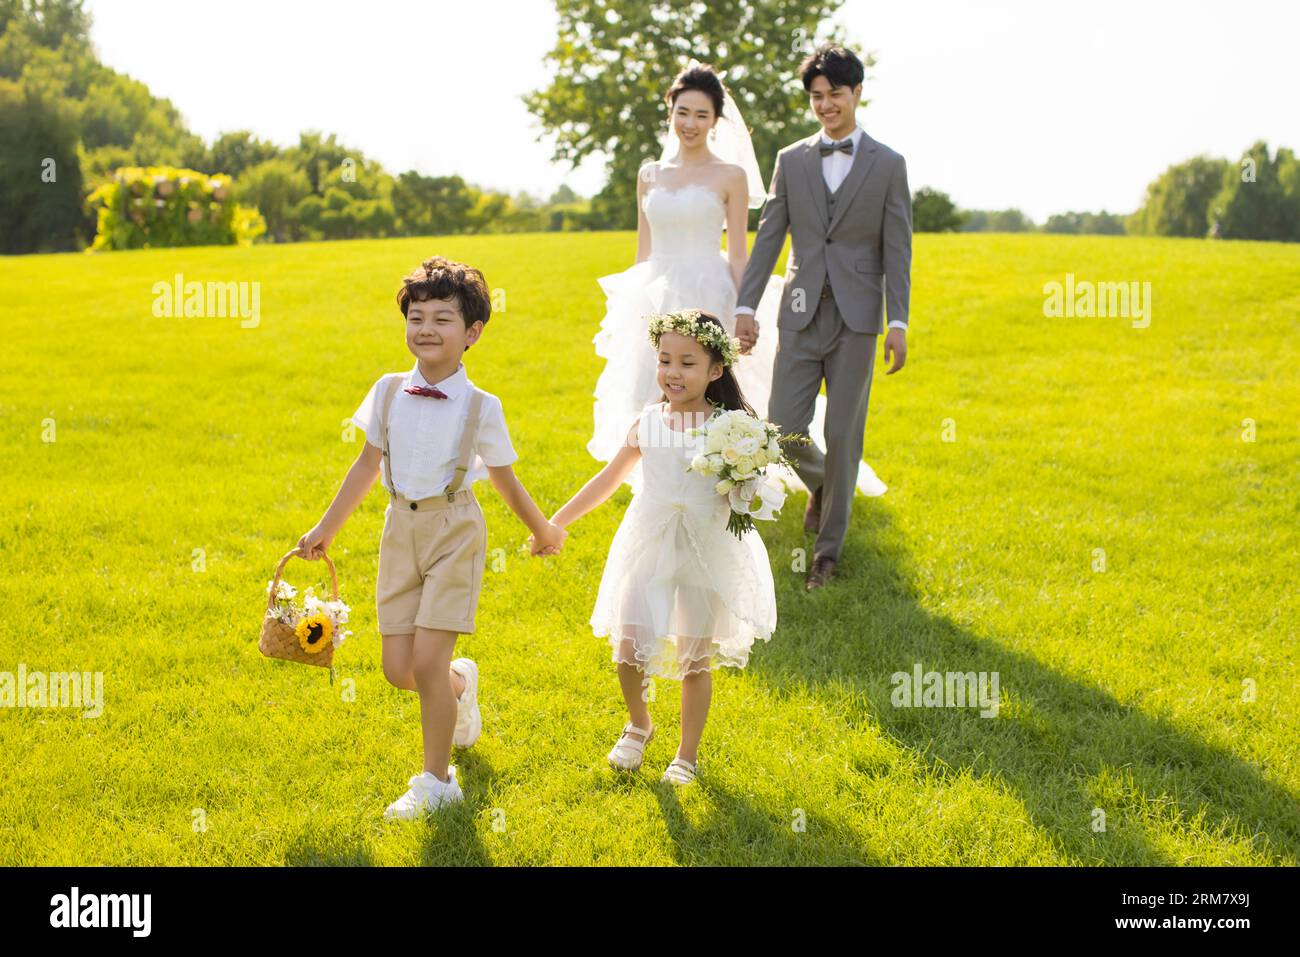 Chinese bride and groom walking through a park with flower girl and ring bearer Stock Photo